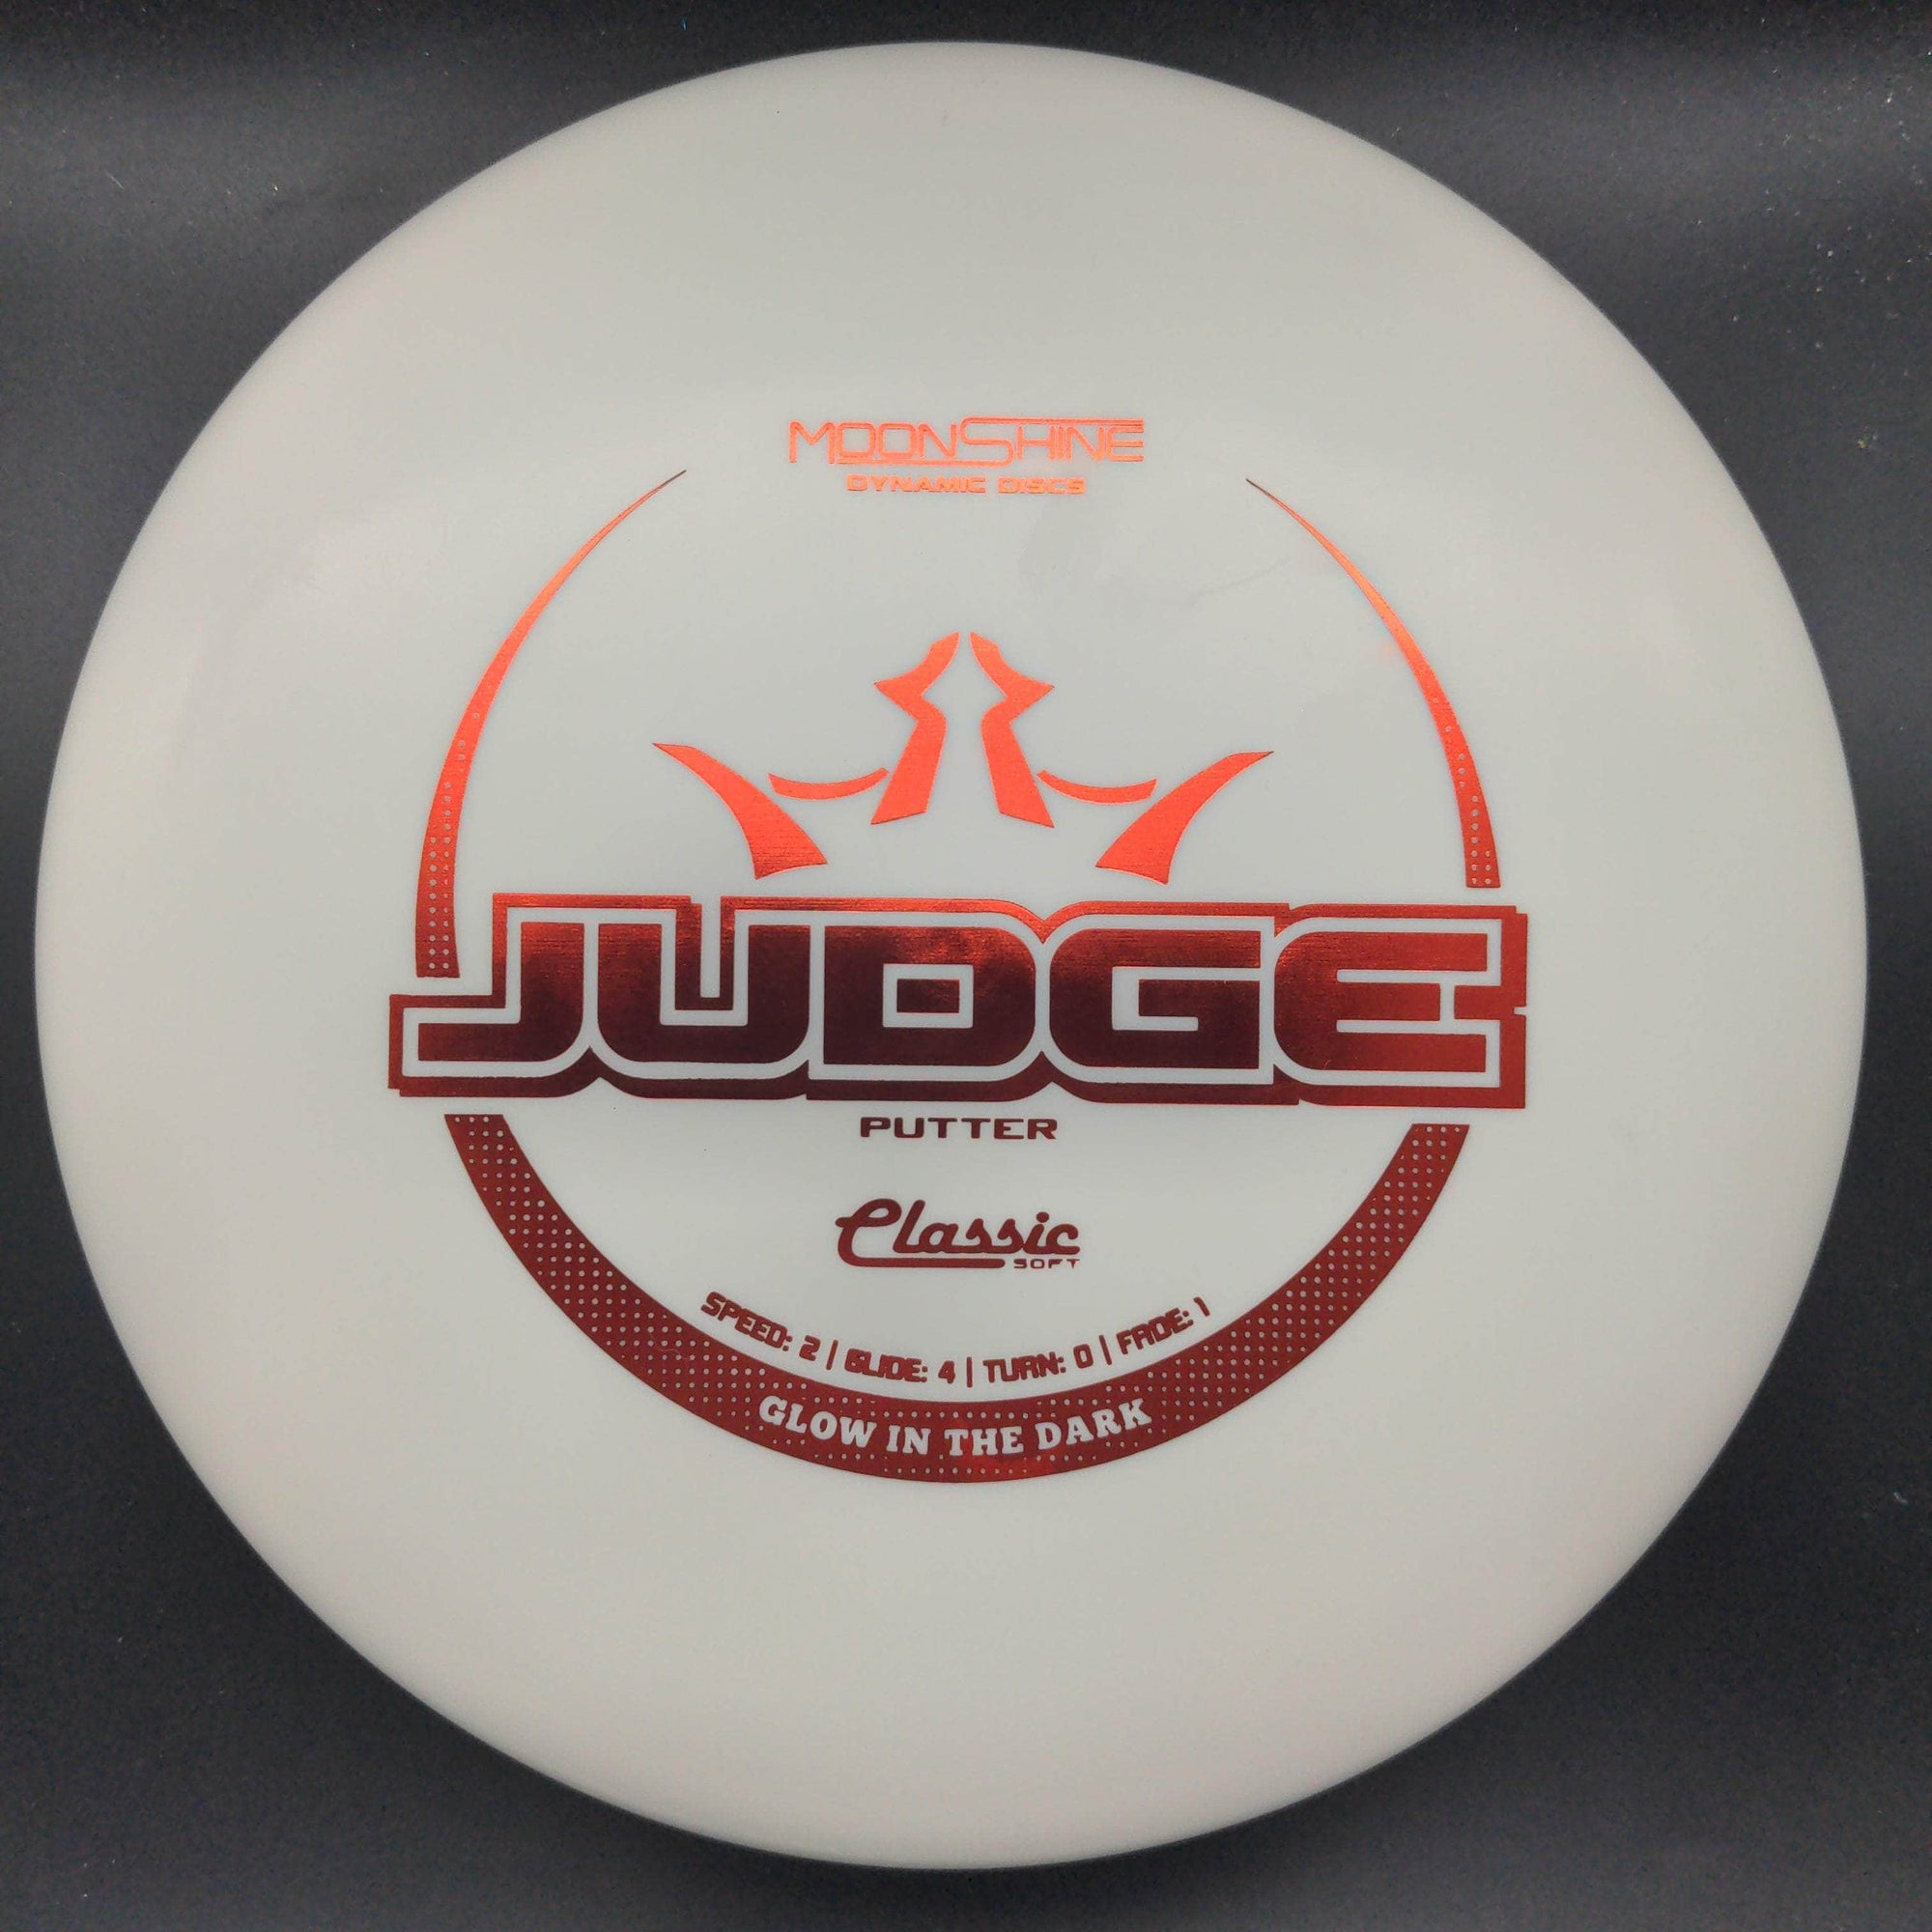 Dynamic Discs Putter White Red Stamp 176g 5 Judge, Classic Soft Moonshine